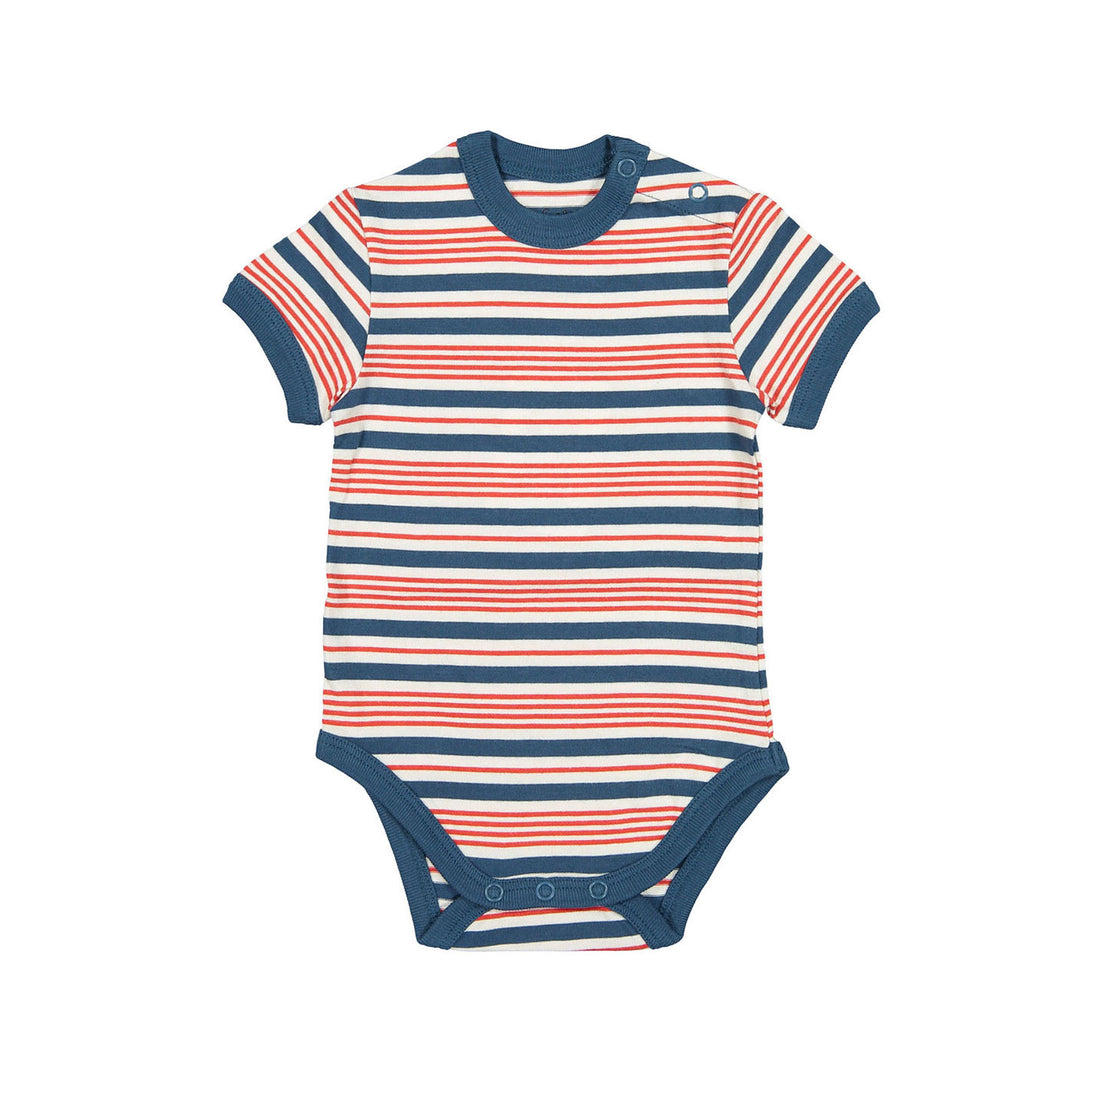 Fin and Vince Americana Stripe Primary Onesie